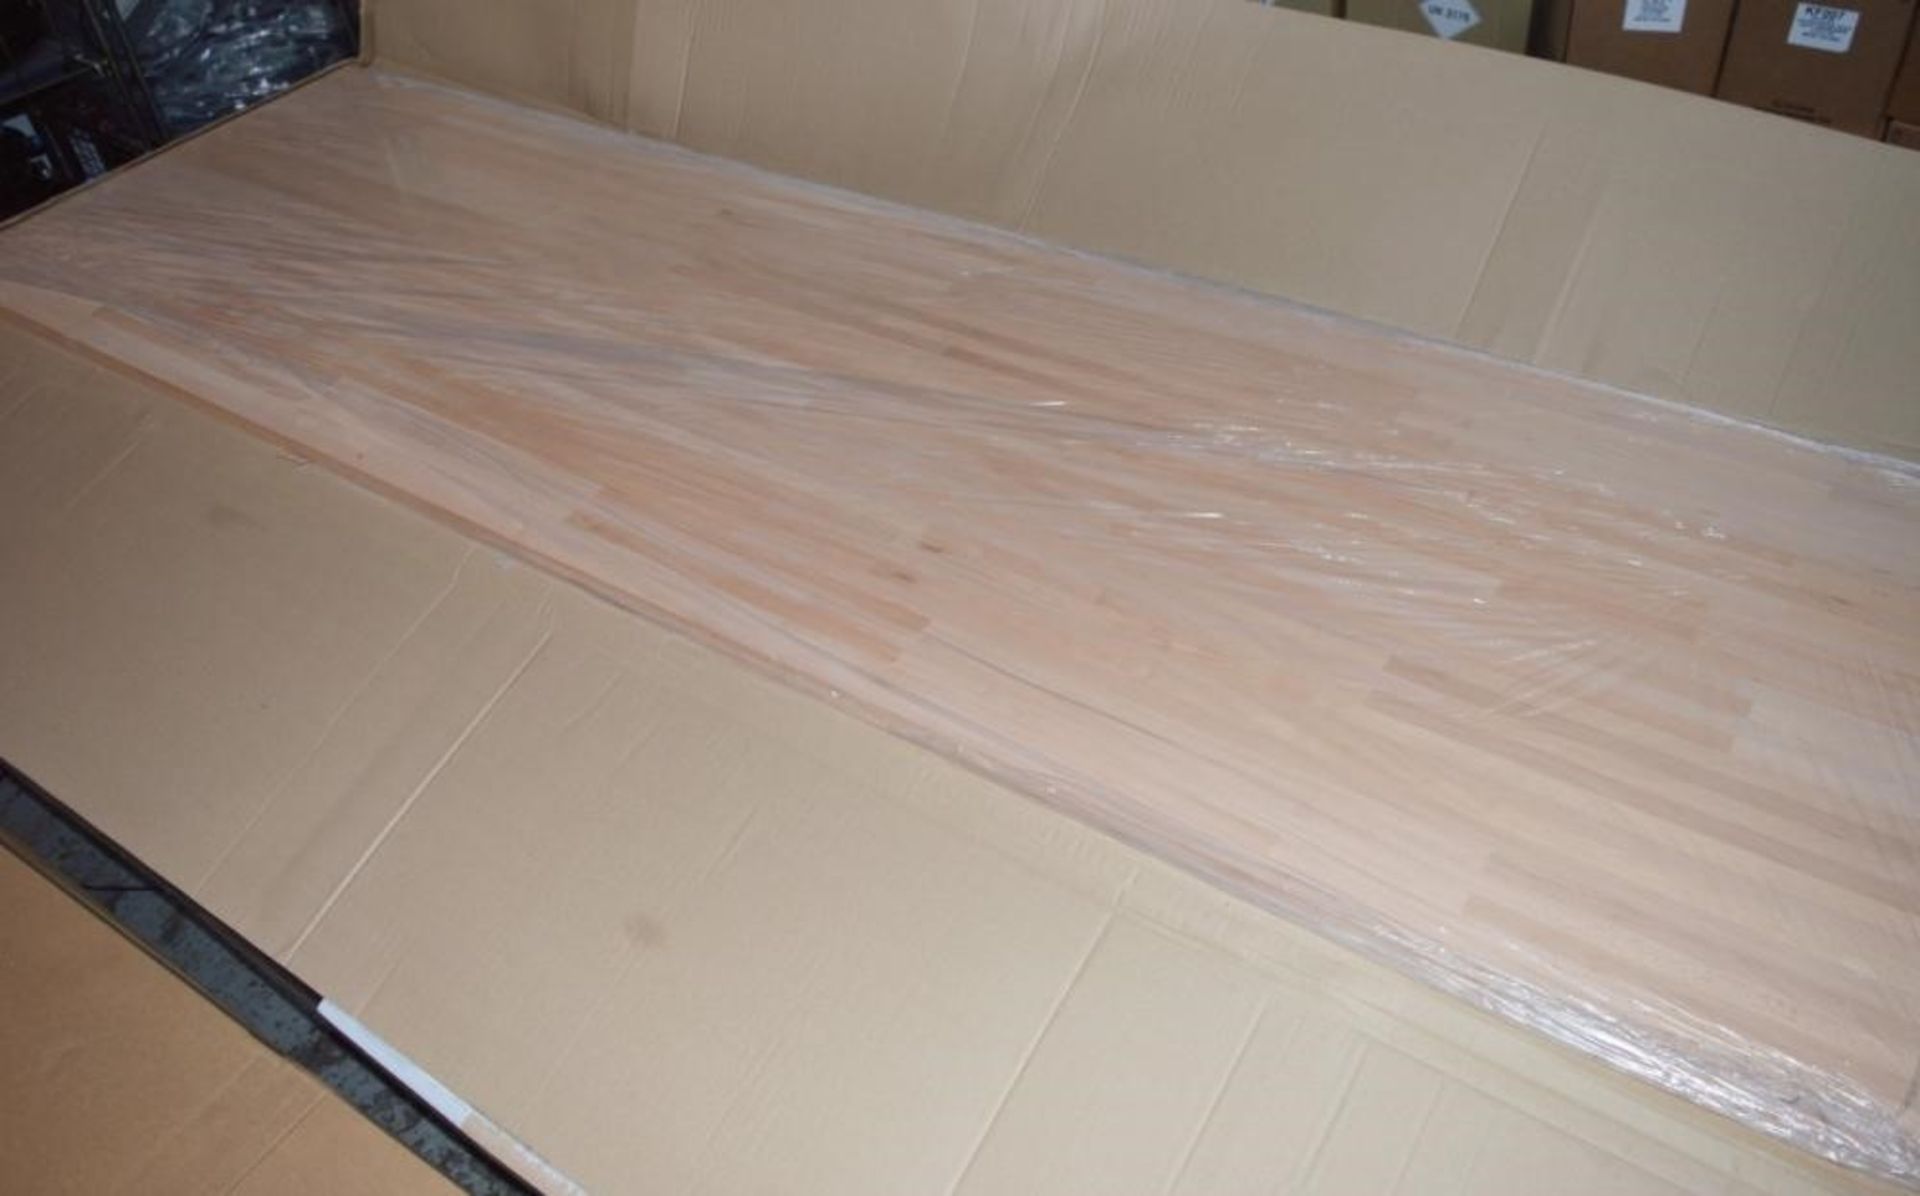 4 x Solid Wood Kitchen Worktops - PRIME BEECH - First Grade Finger Jointed Kitchen Worktop - Size: - Image 5 of 5